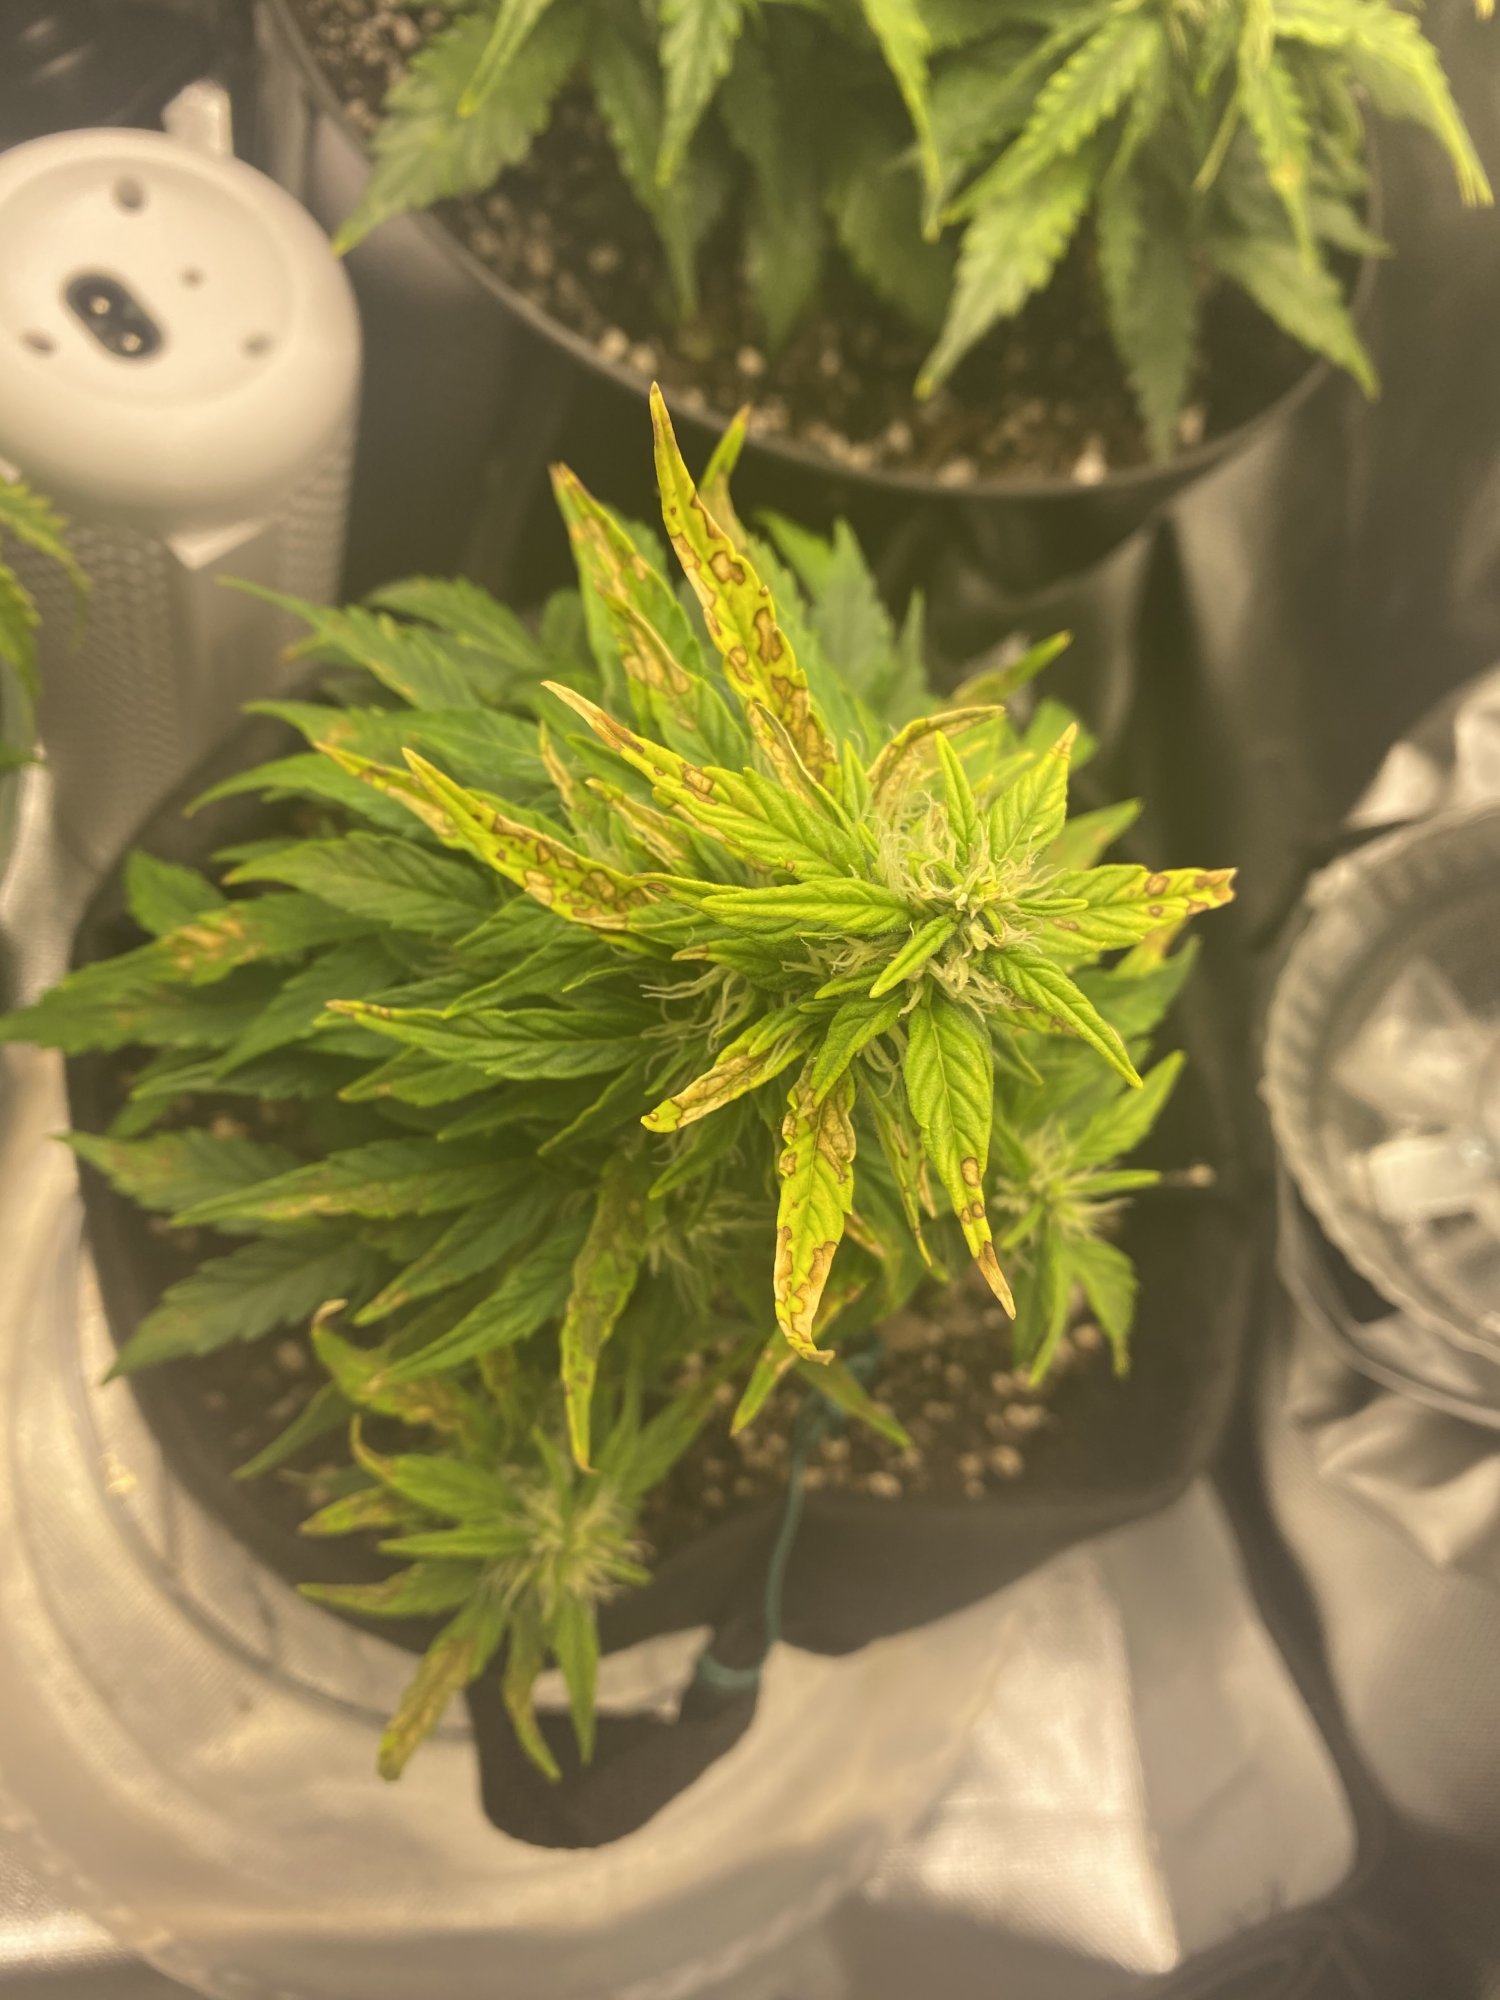 Please help my plants was showing some yellowing and browning a week ago 3